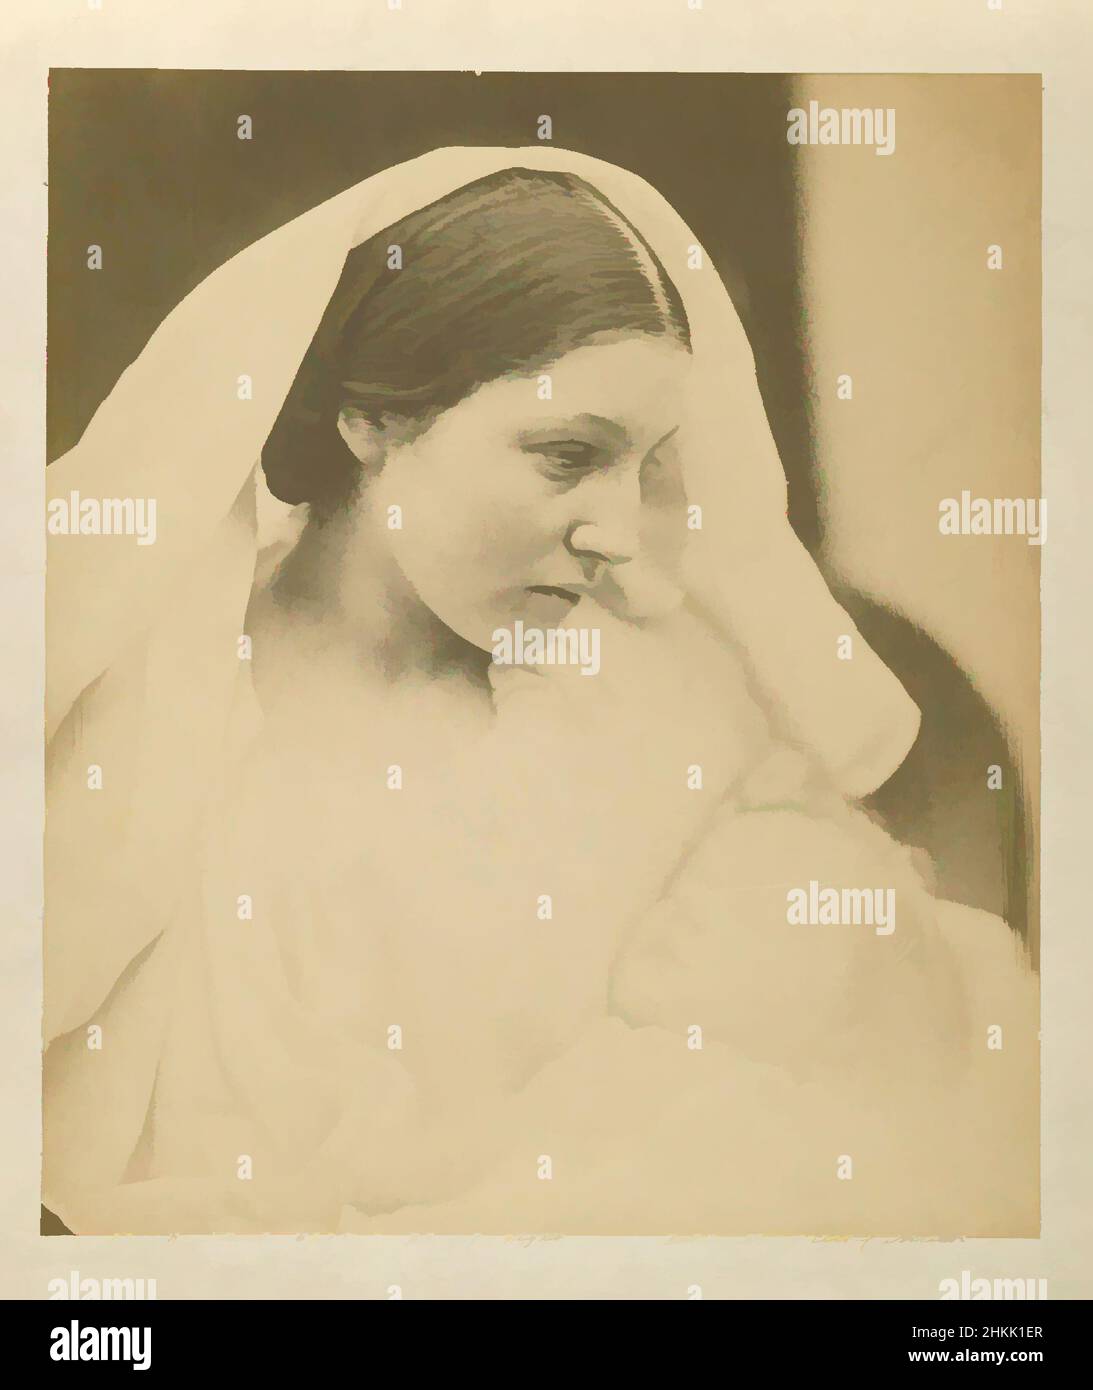 Art inspired by La Madonna Riposata/ Resting in Hope, Julia Margaret Cameron, British, born India, 1815-1879, Albumen silver photograph, 1864, Image: 9 1/2 x 8 in., 24.1 x 20.3 cm, 19thC, b/w, child, early photography, female photographer, Madonna, woman artist, young woman, Classic works modernized by Artotop with a splash of modernity. Shapes, color and value, eye-catching visual impact on art. Emotions through freedom of artworks in a contemporary way. A timeless message pursuing a wildly creative new direction. Artists turning to the digital medium and creating the Artotop NFT Stock Photo